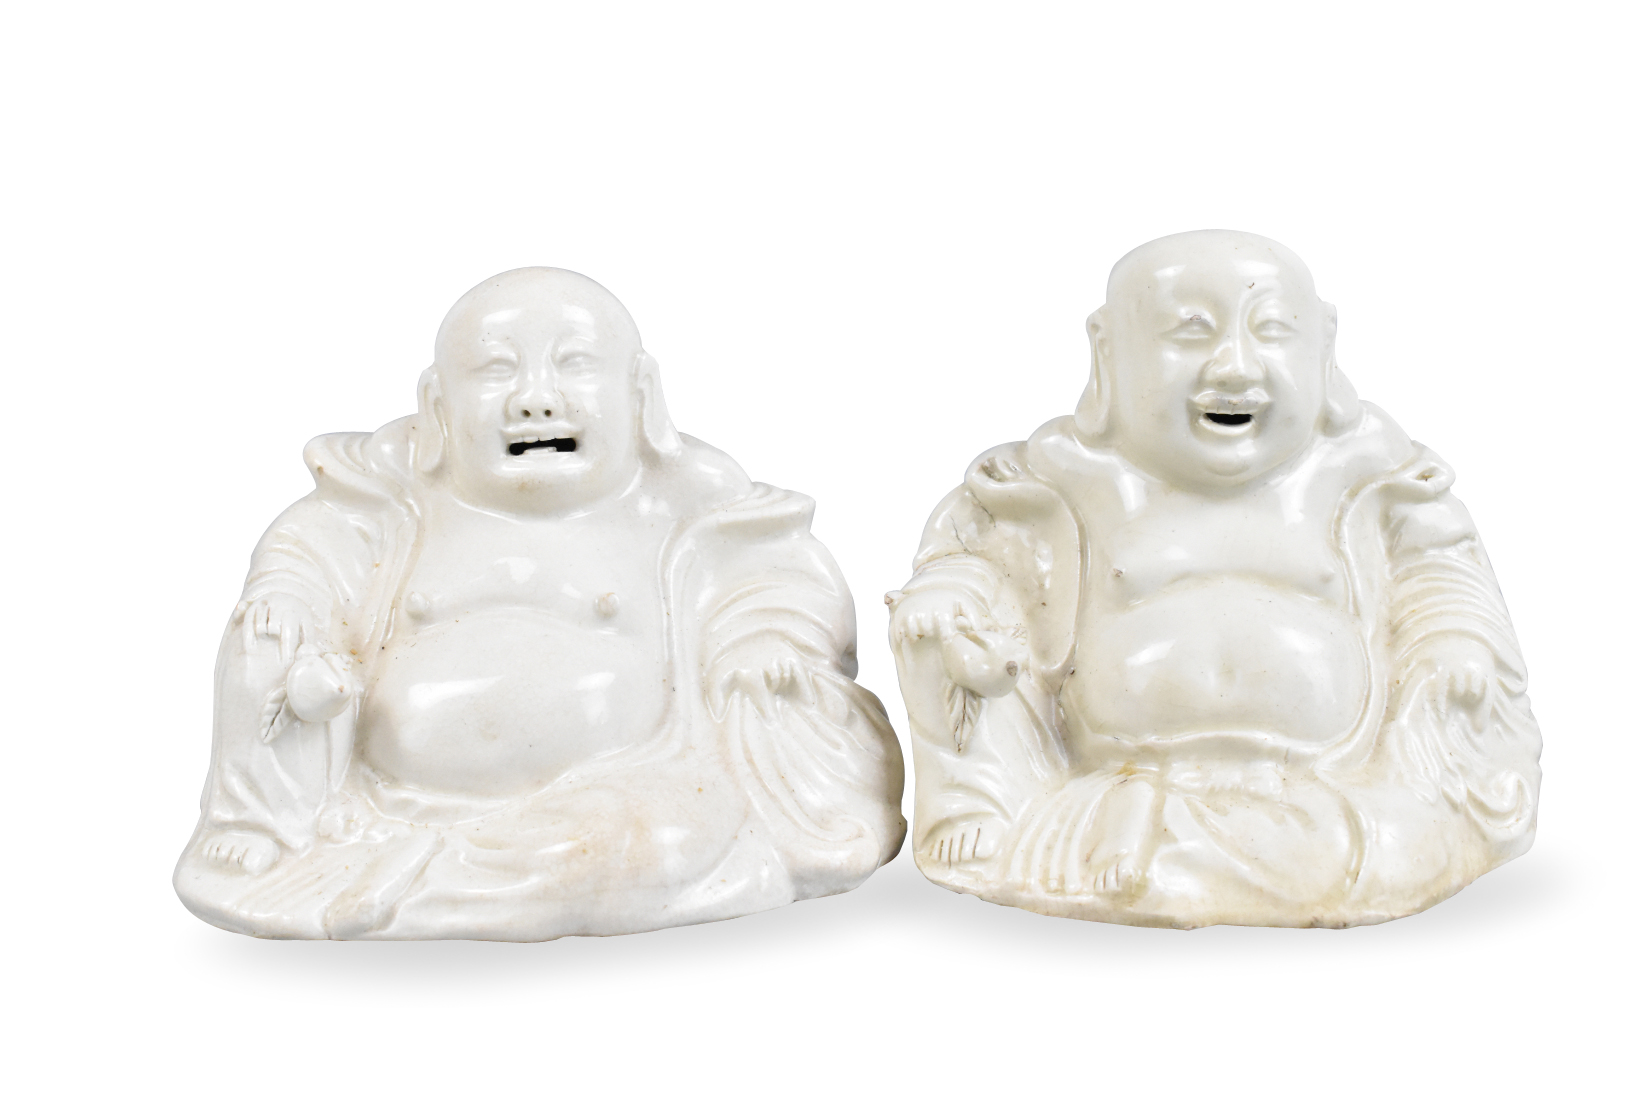 PAIR OF CHINESE GE GLAZED LAUGHING 33a2fb